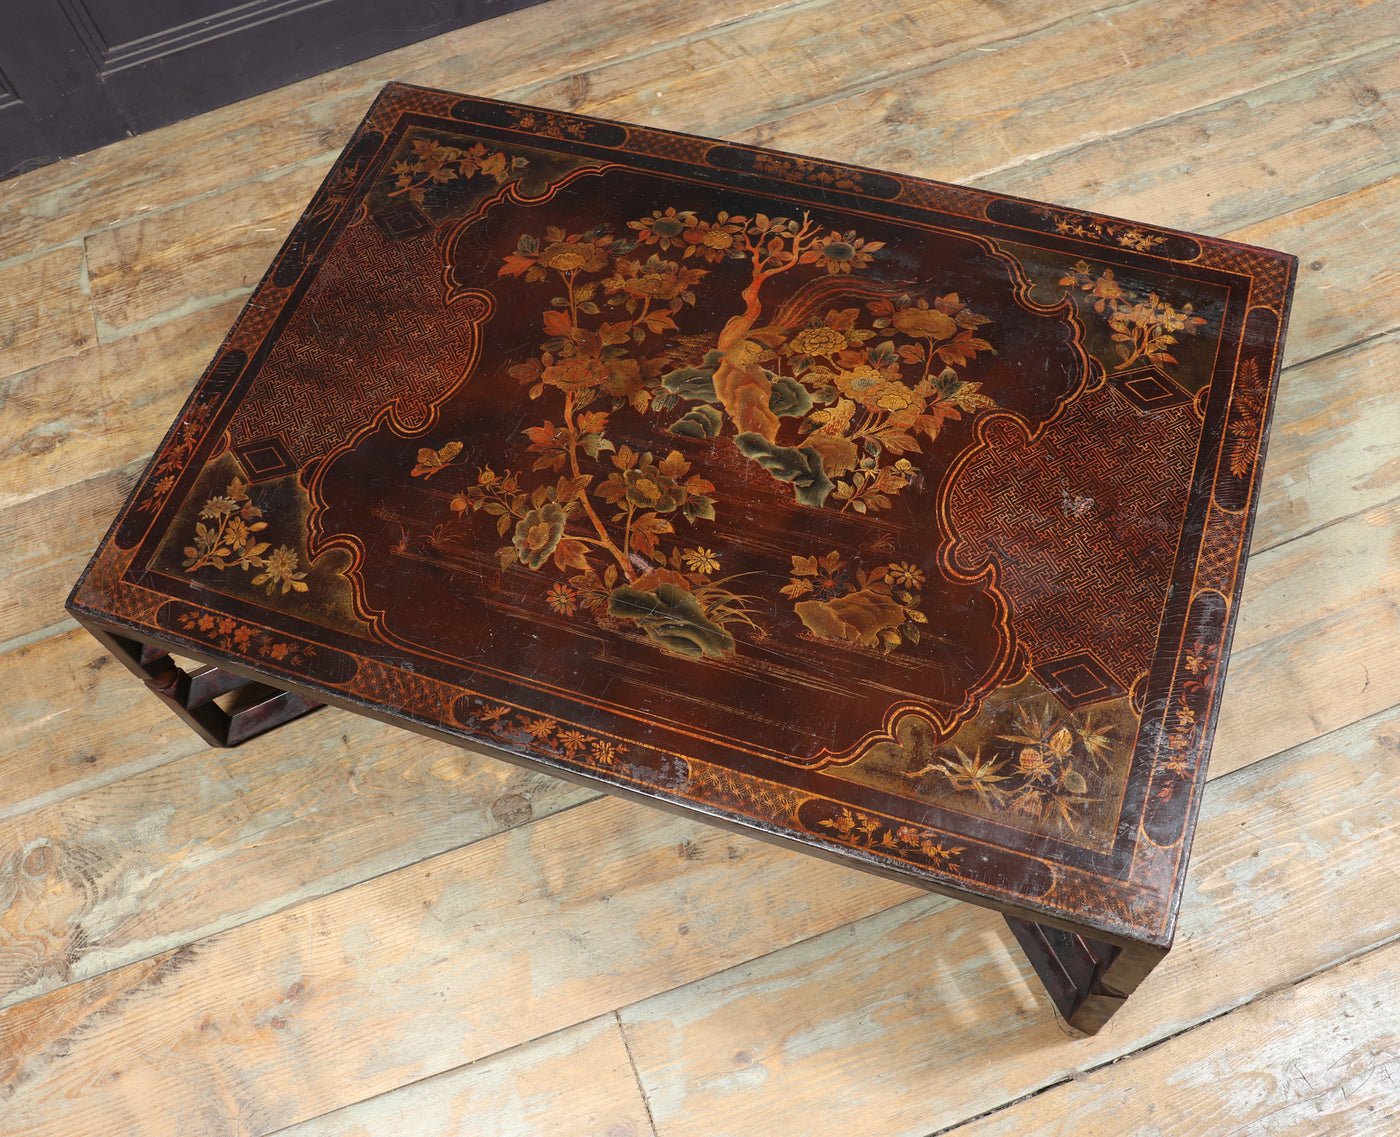 Antique Chinoiserie Low Table c1900